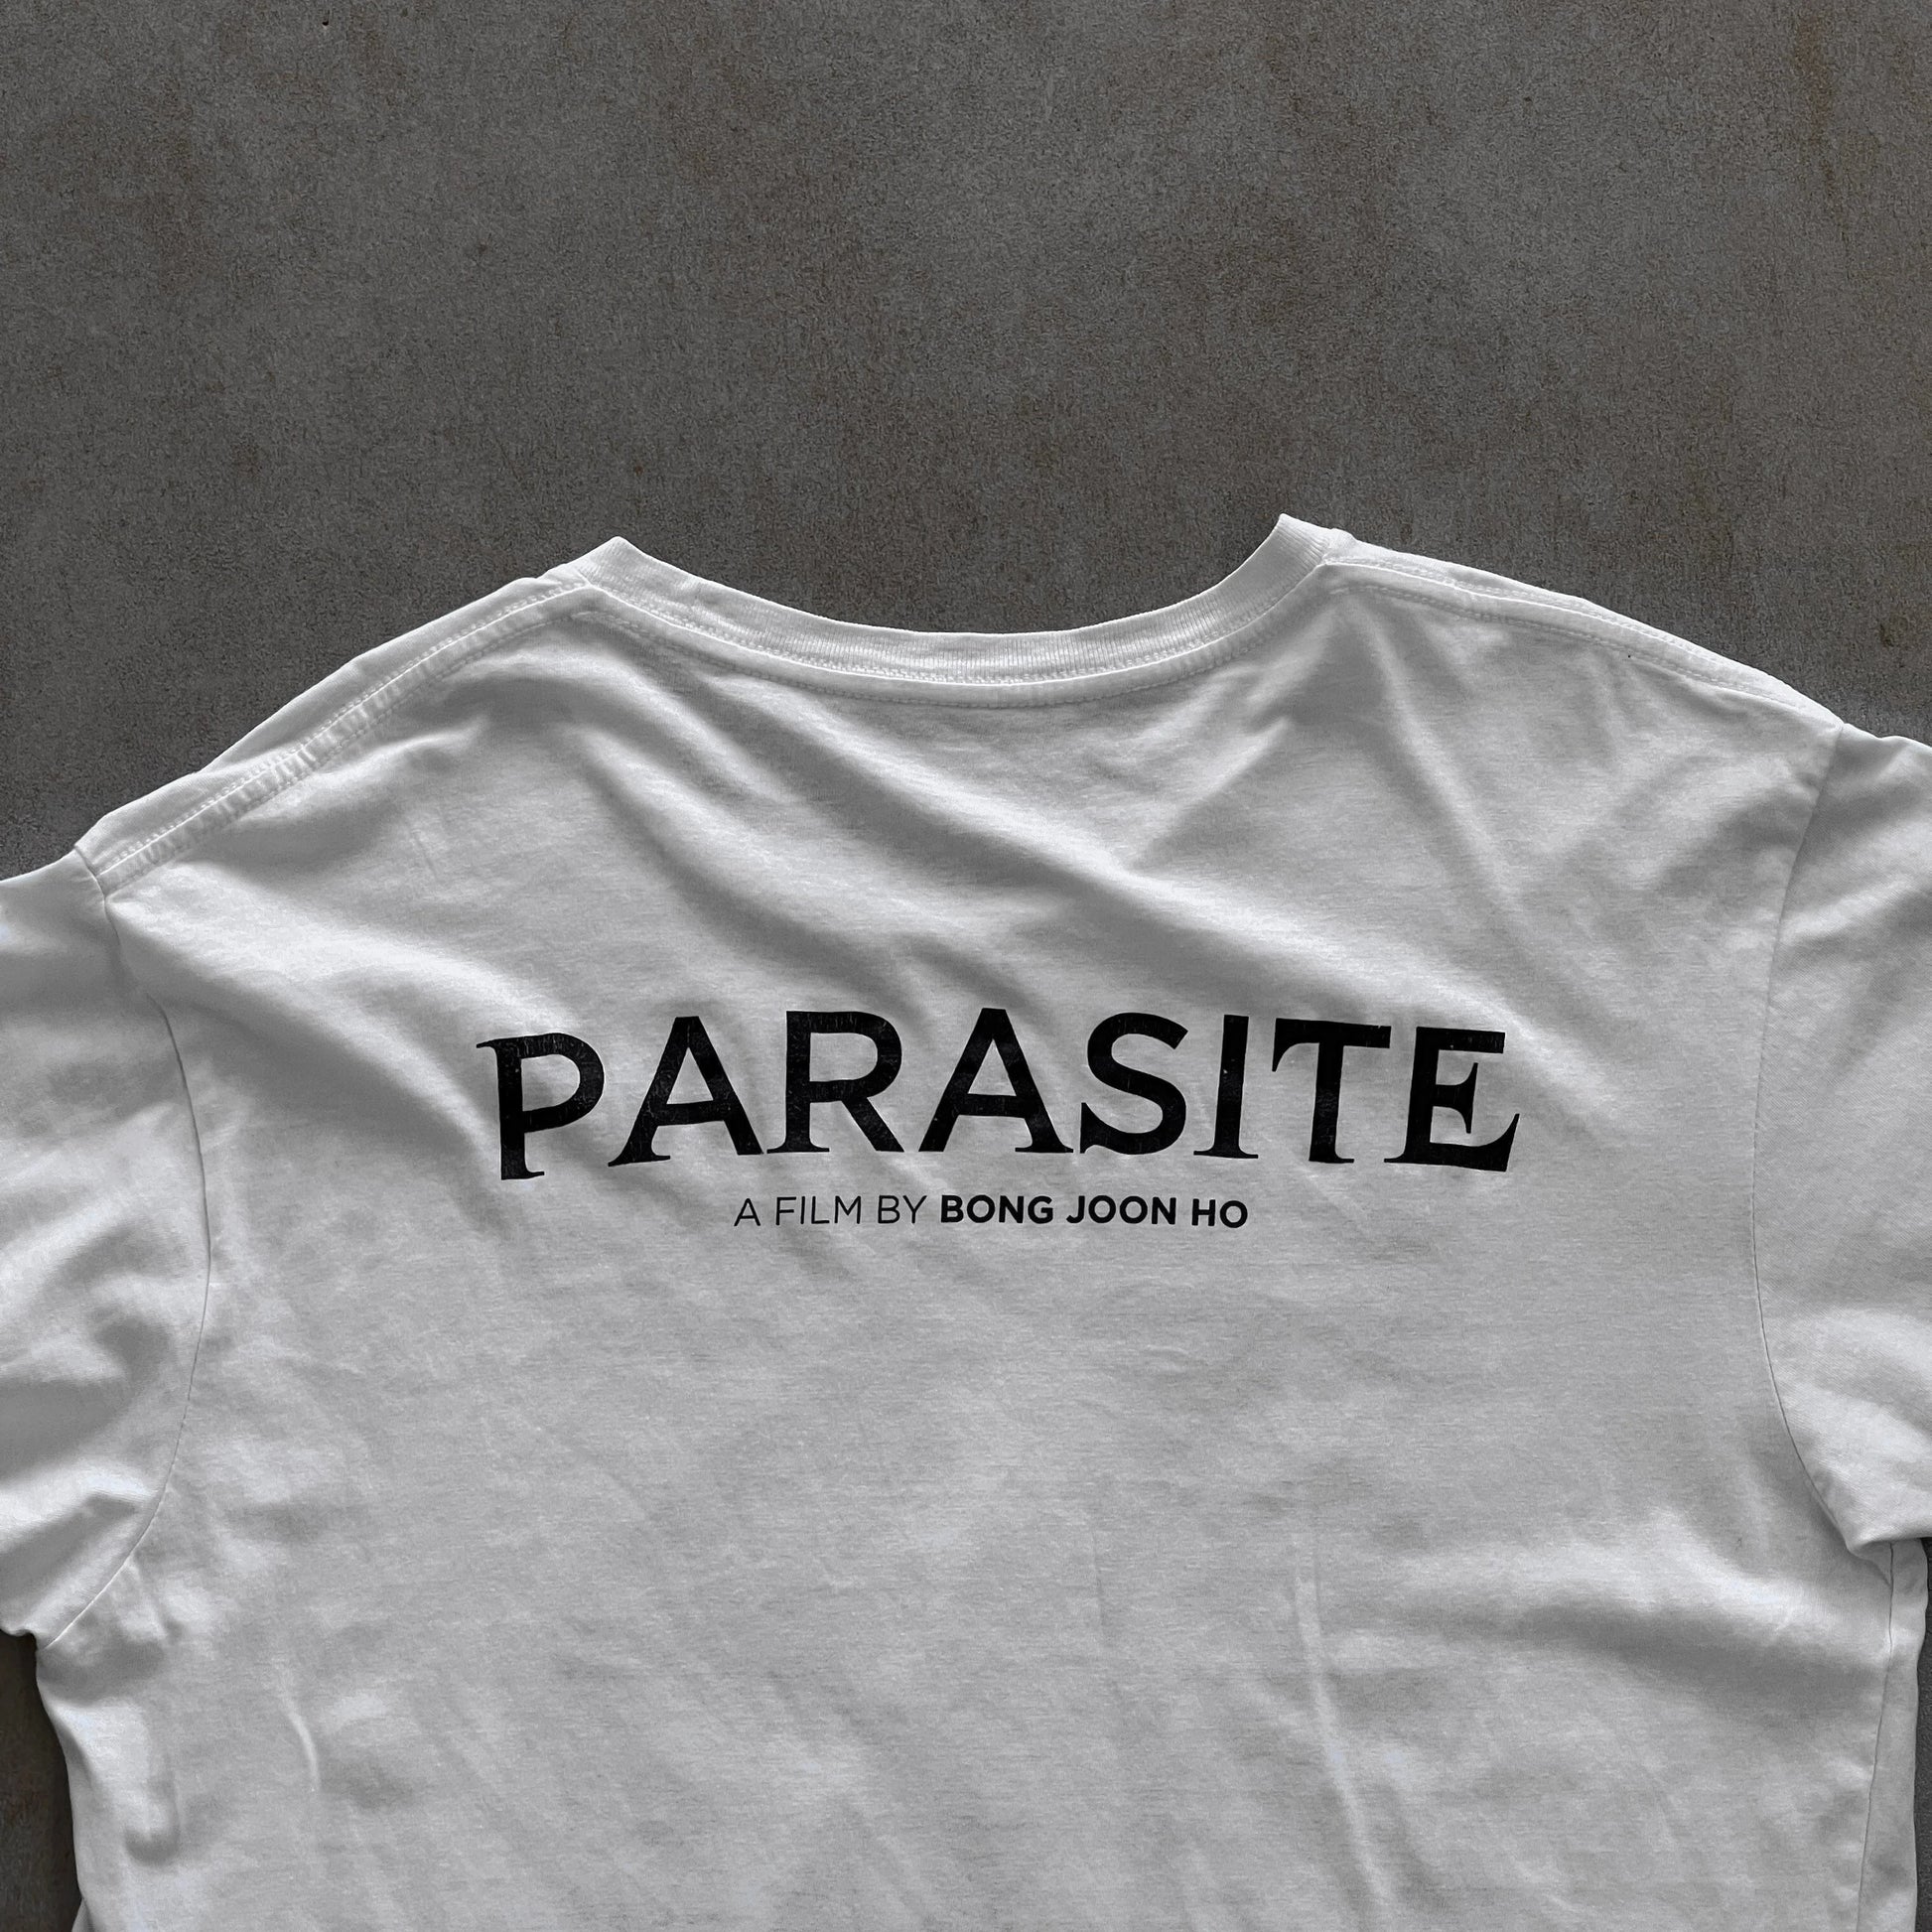 parasite-by-bong-joon-ho-promo-shirt-by-neon-s-sullivansvintage